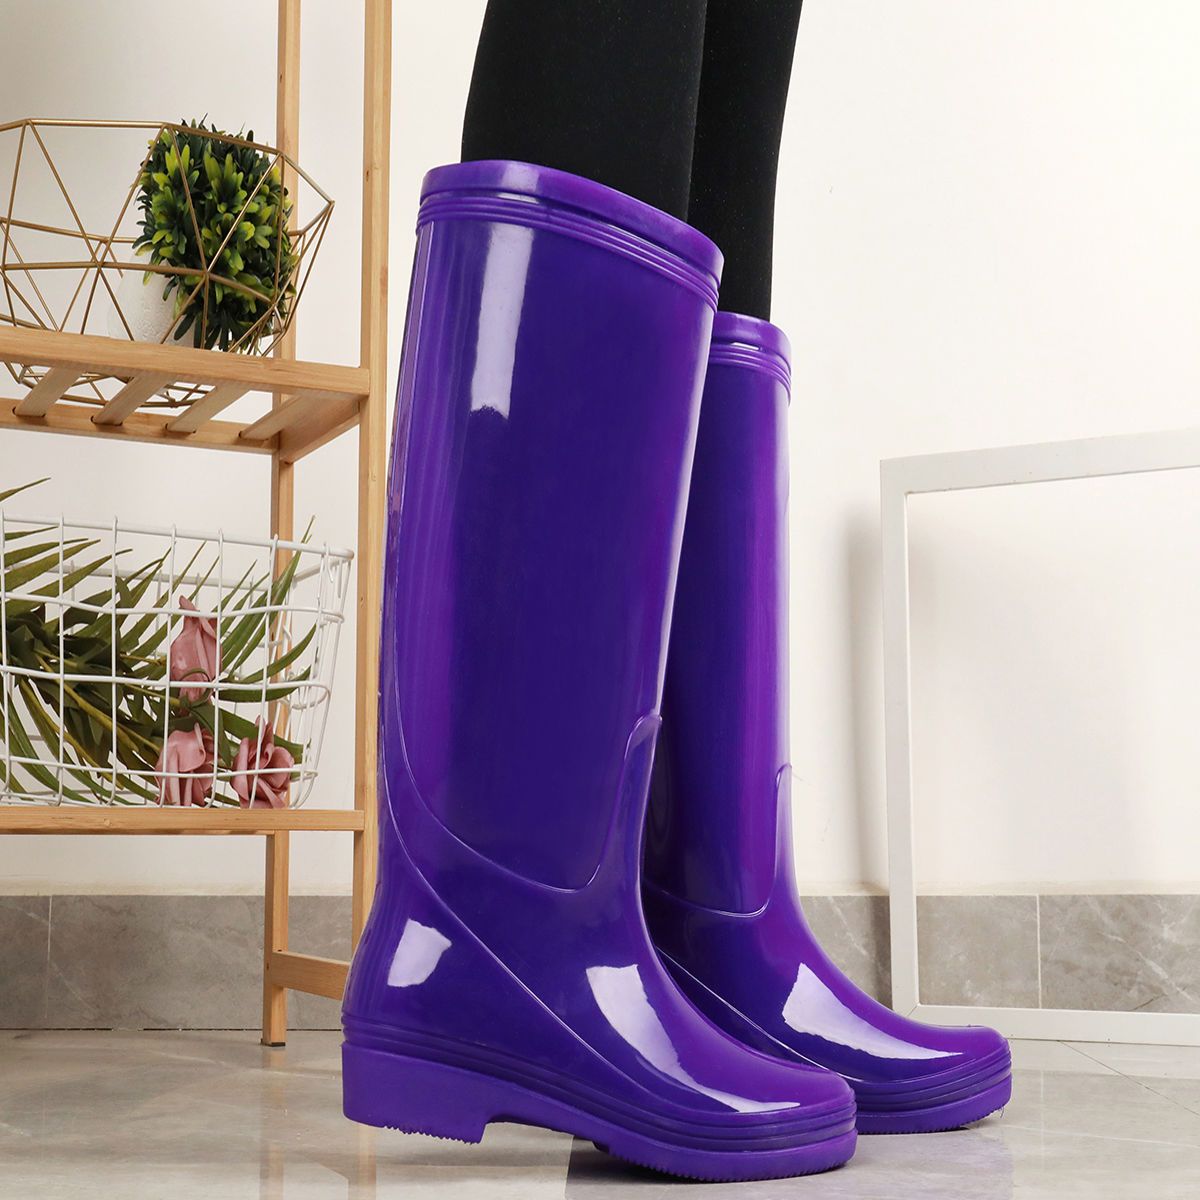 New lineless mesh quick-drying non-slip plus velvet high-tube rain boots rain boots waterproof shoes rubber shoes overshoes water boots women's kitchen